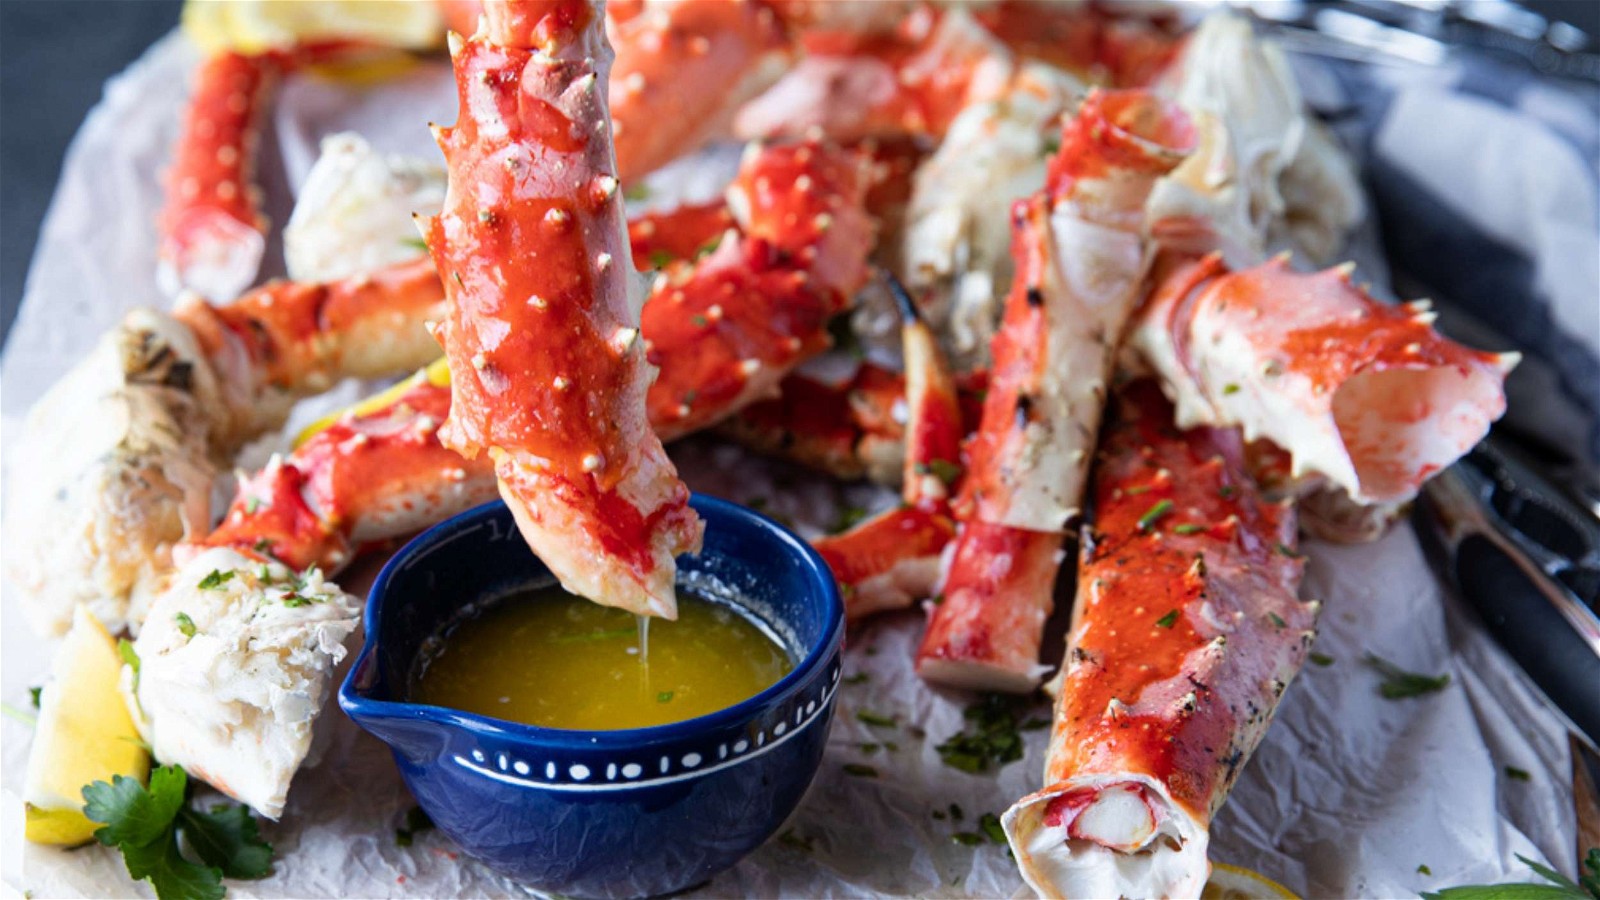 Image of How to Cook King Crab Legs - Boil, Steam or Bake